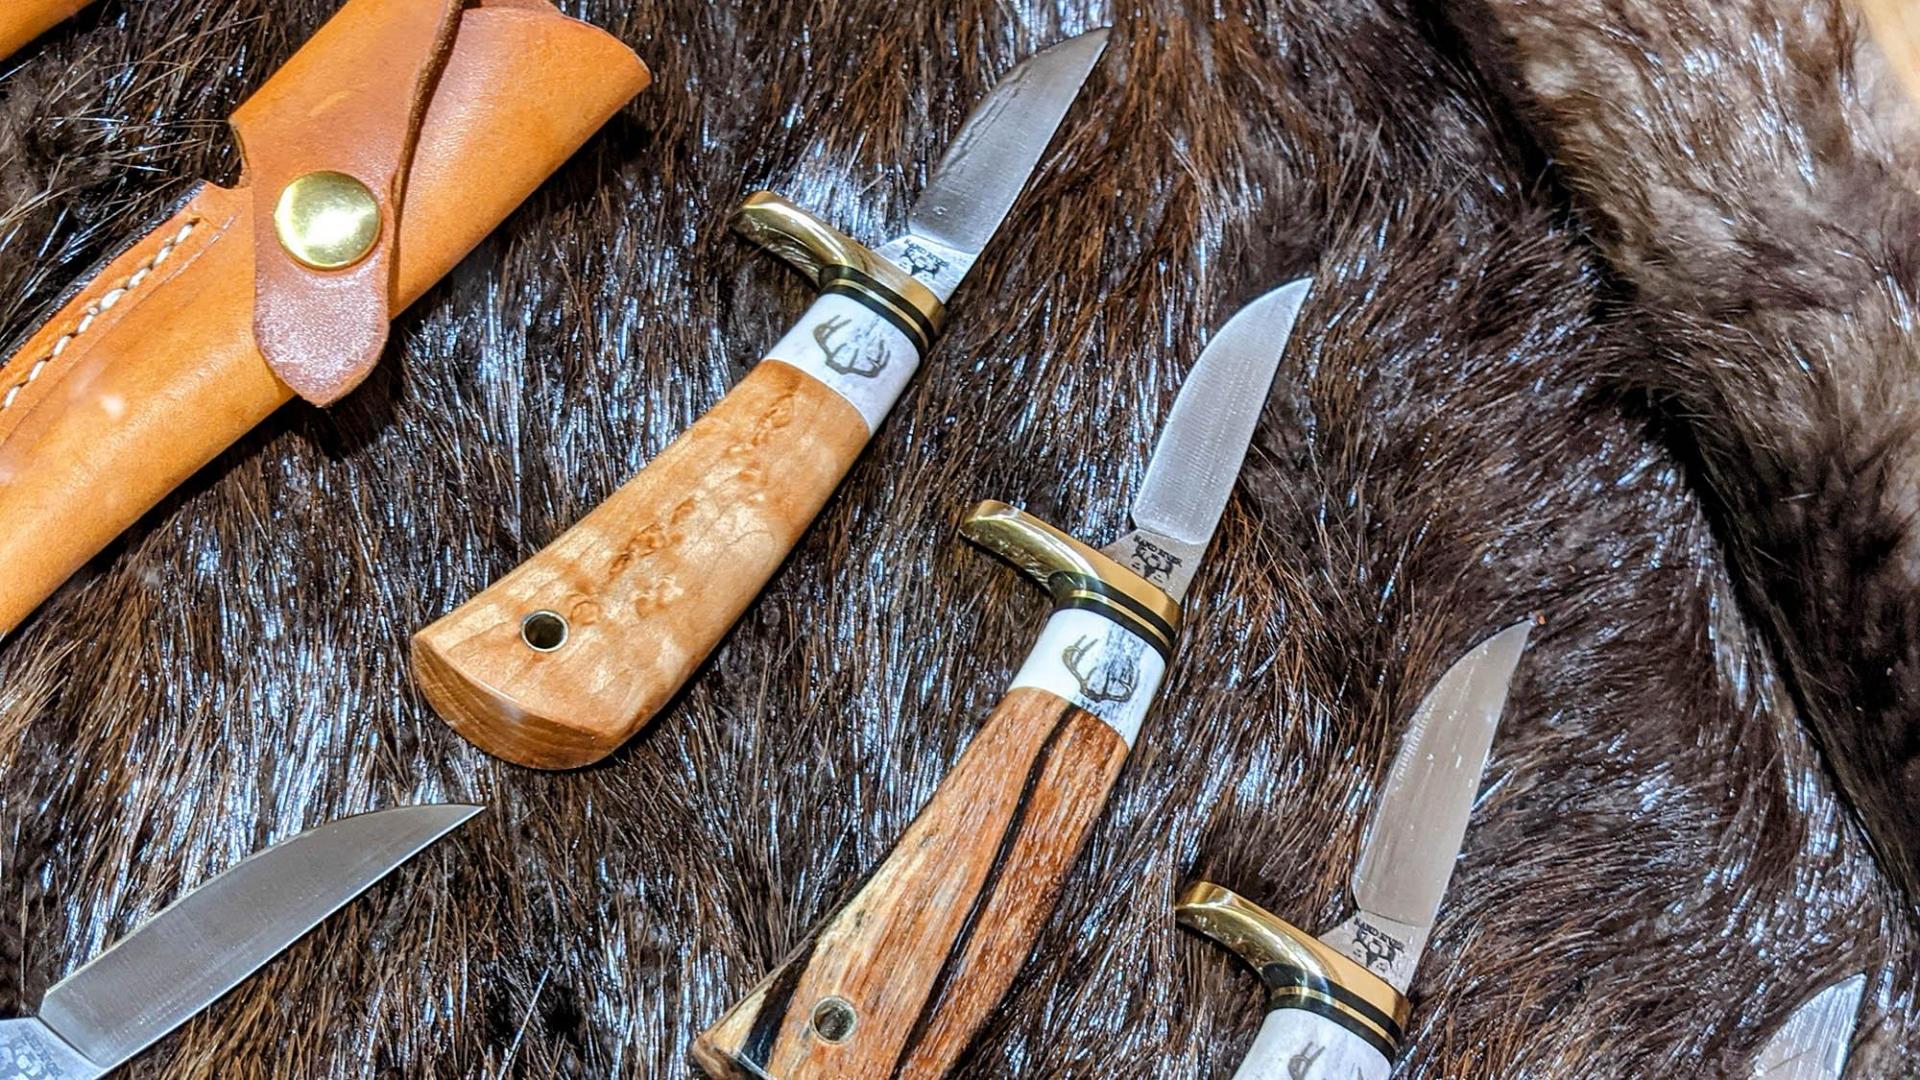 A row of knives on a fur blanket at Rapid River Knifeworks